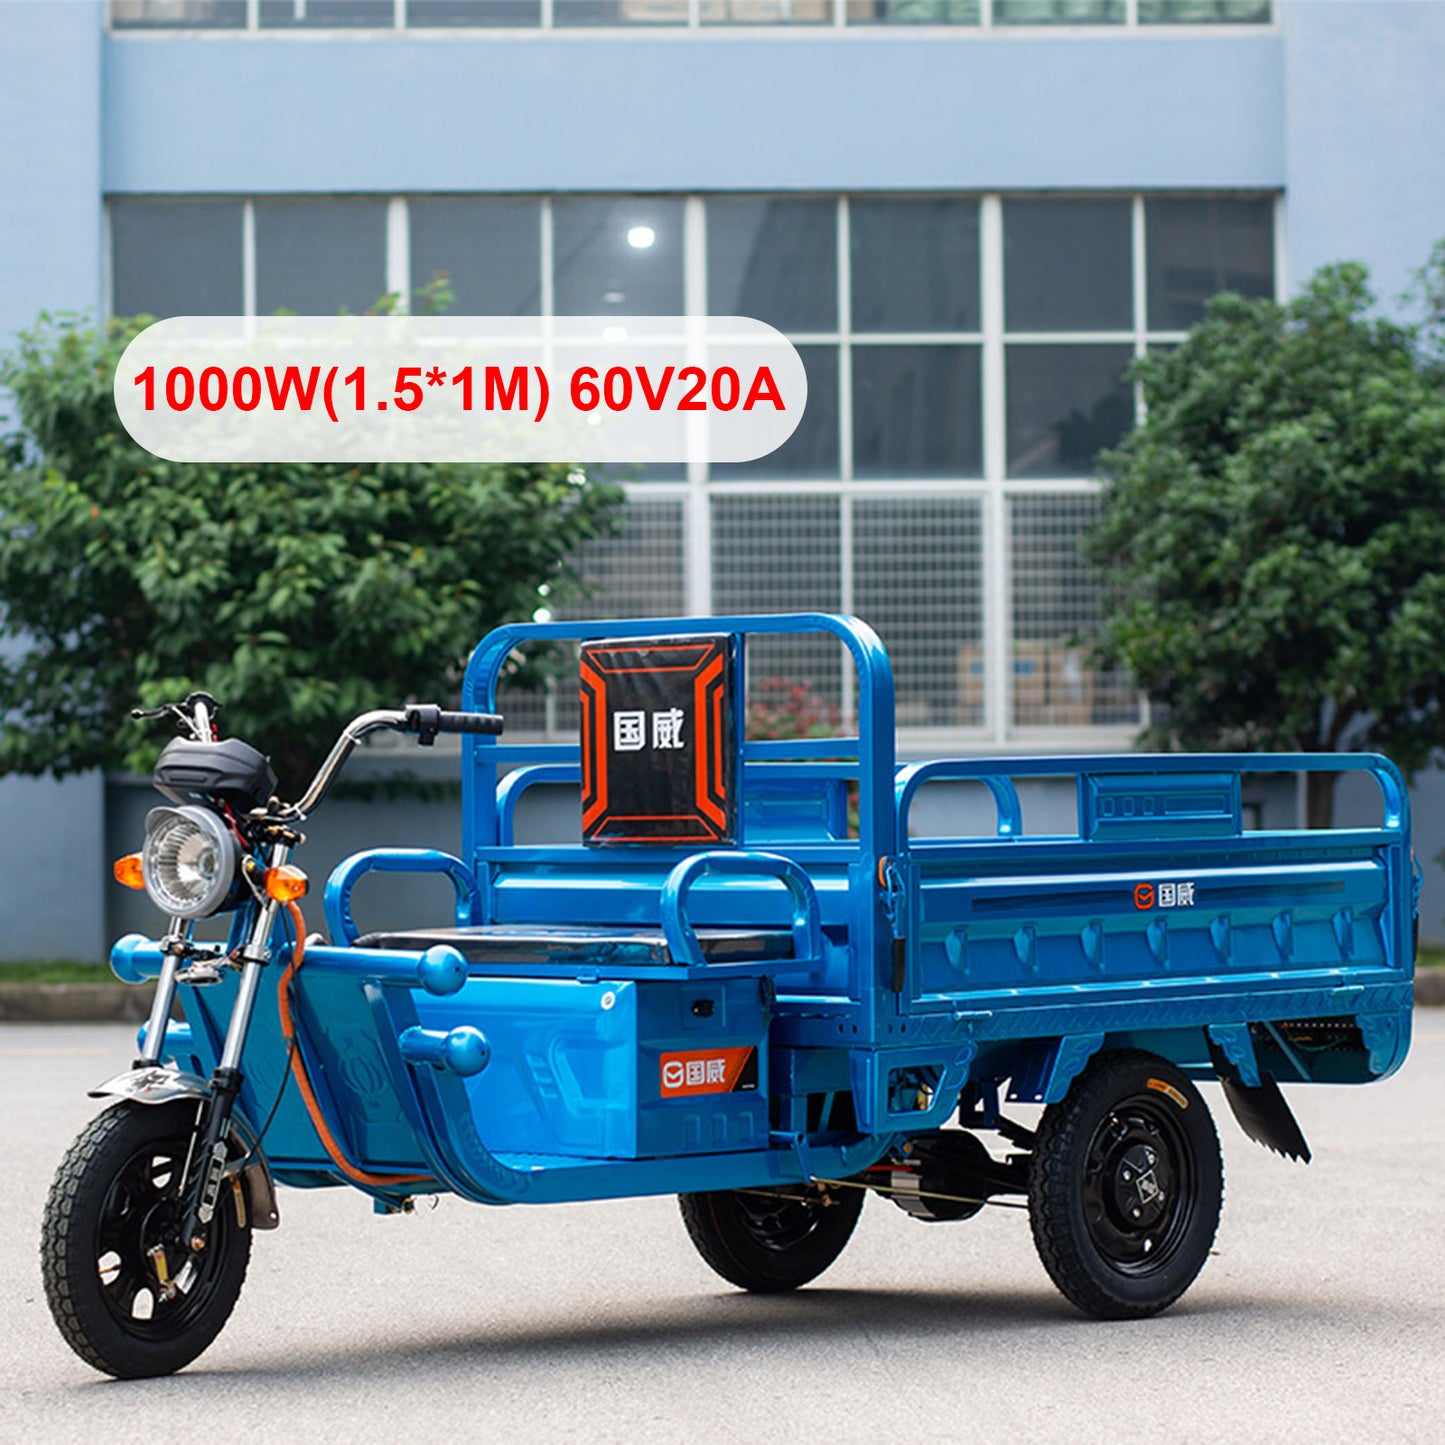 1000W Motor 60V 20Ah Lead Acid Battery Electric Cargo Tricycle For Adult